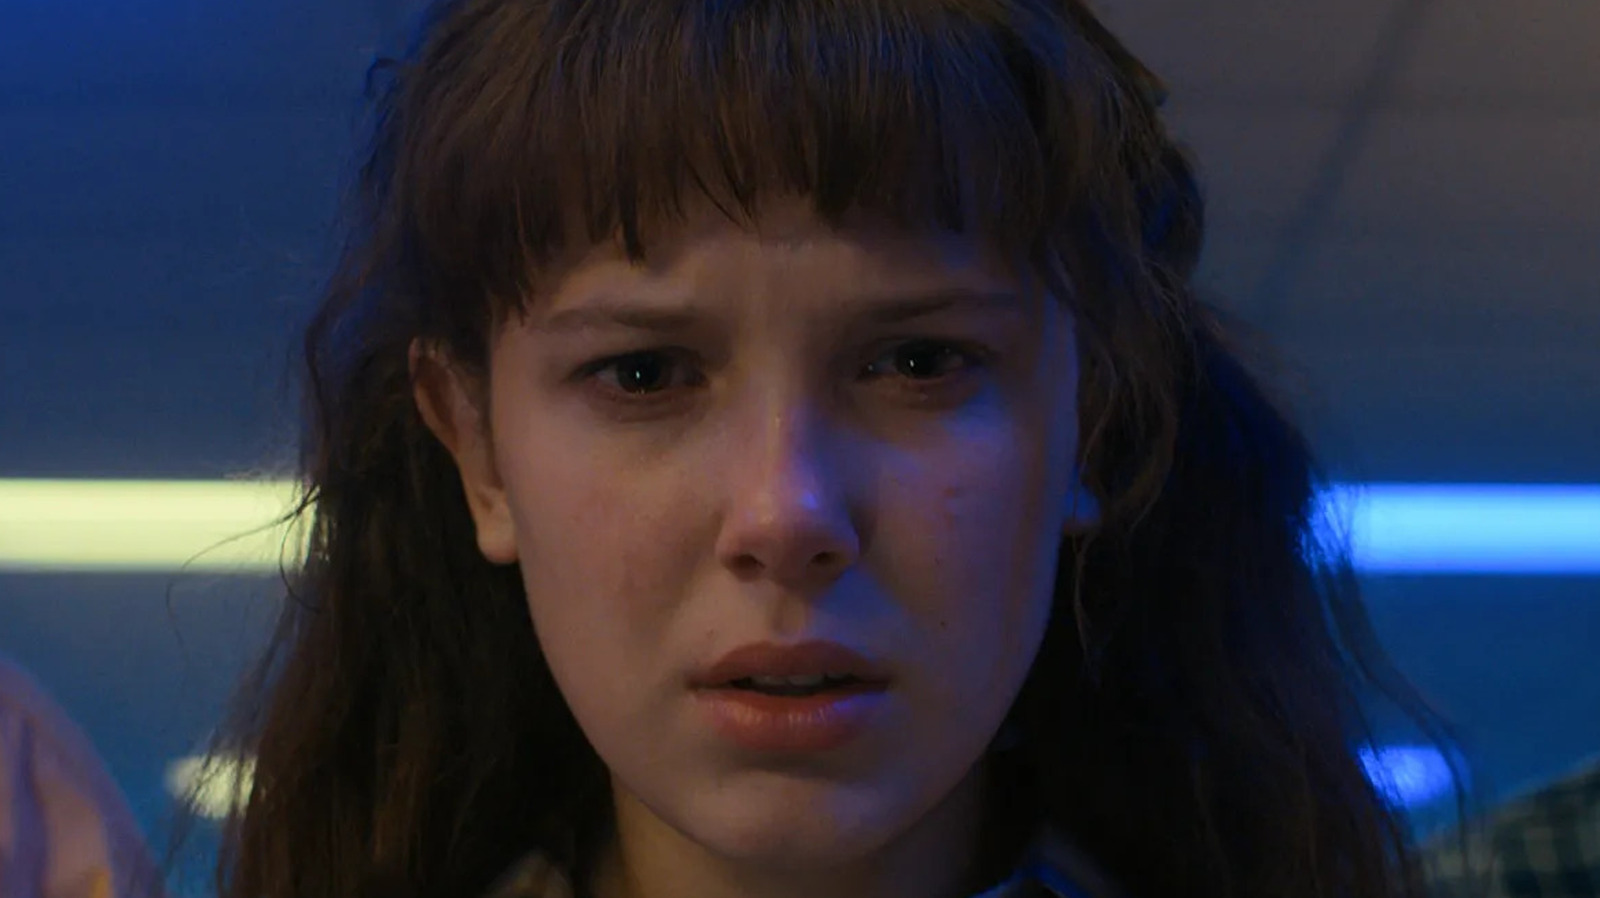 27 Details in 'Stranger Things 4' You Might Have Missed